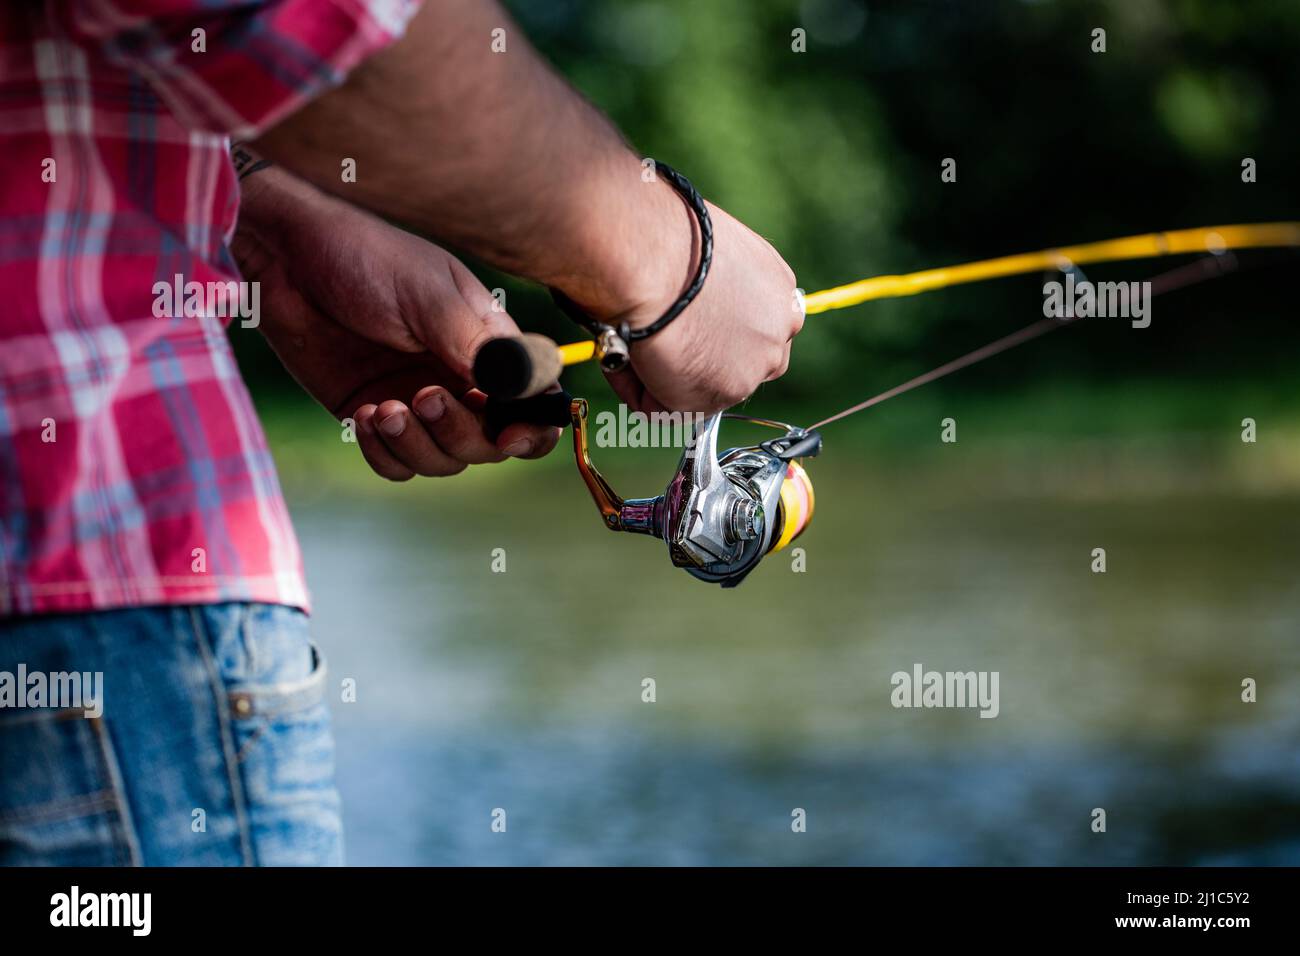 https://c8.alamy.com/comp/2J1C5Y2/fishing-reel-fishing-rod-with-aluminum-body-spool-fishing-gear-fish-supplies-and-equipment-fishings-reel-close-up-on-the-background-of-the-river-2J1C5Y2.jpg